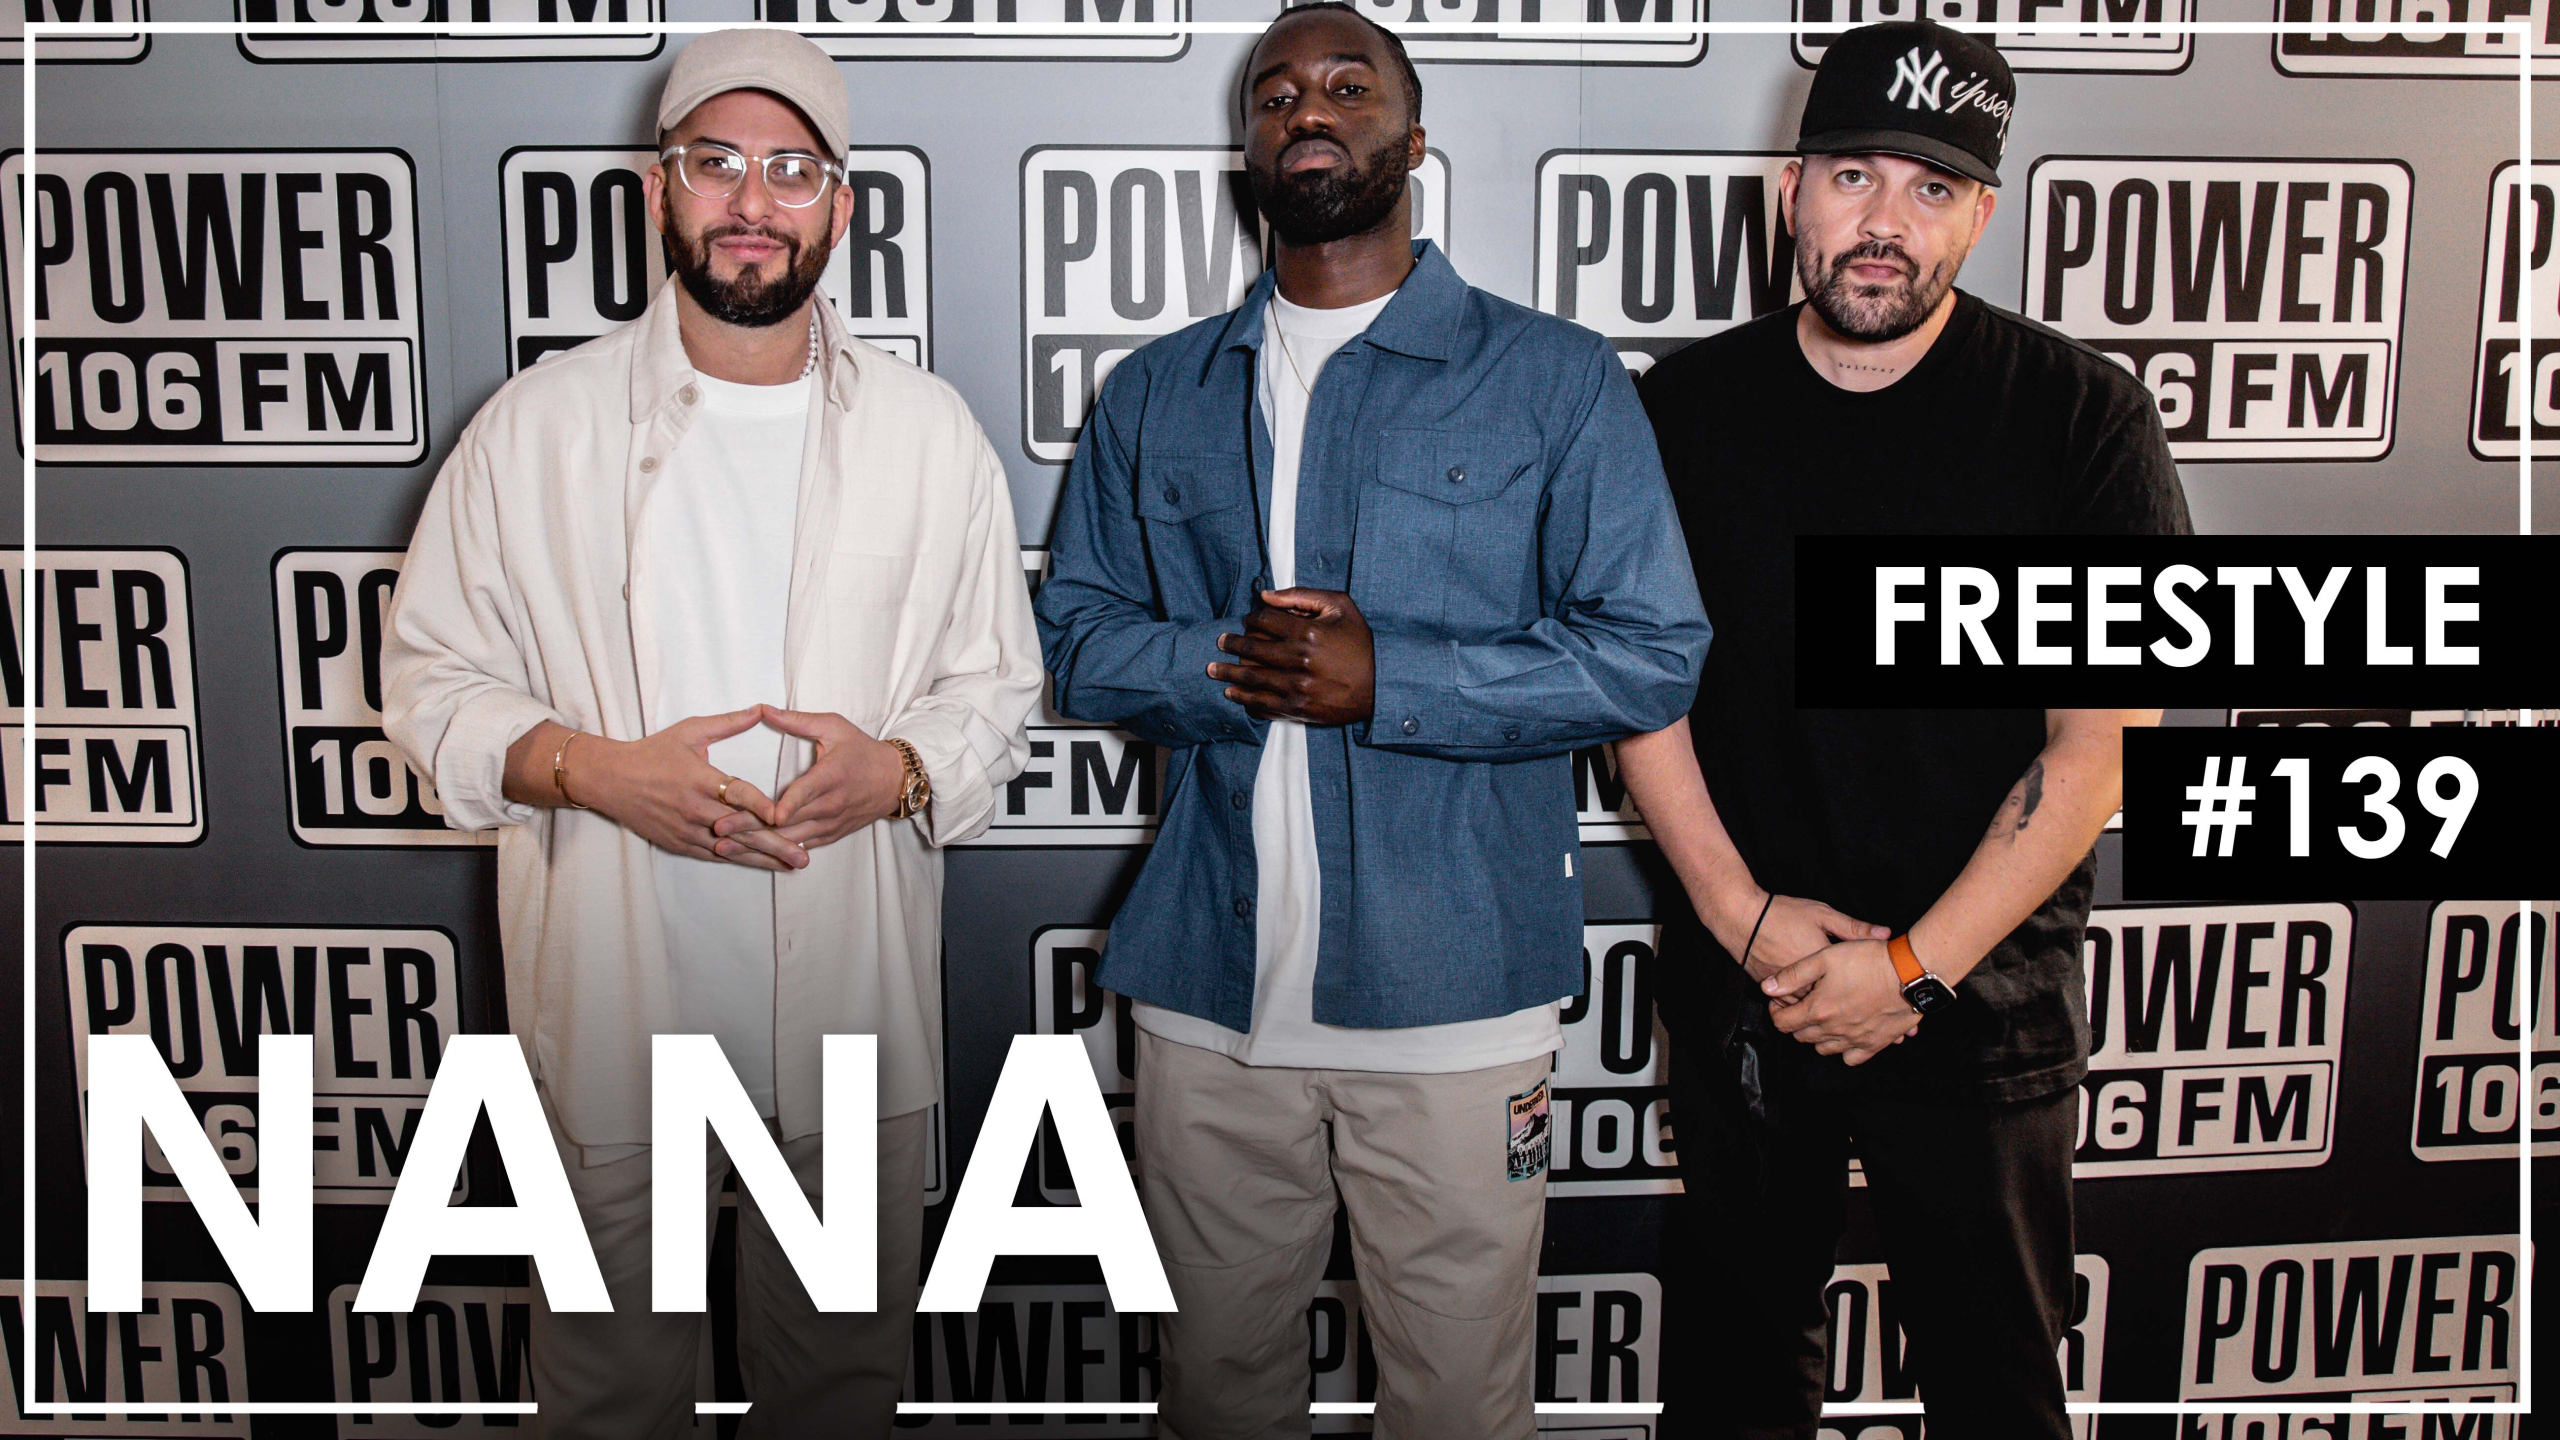 Nana Reps LA With Bars Over Dr. Dre’s “The Watcher” & Nipsey Hussle’s “Face The World” – Freestyle 139